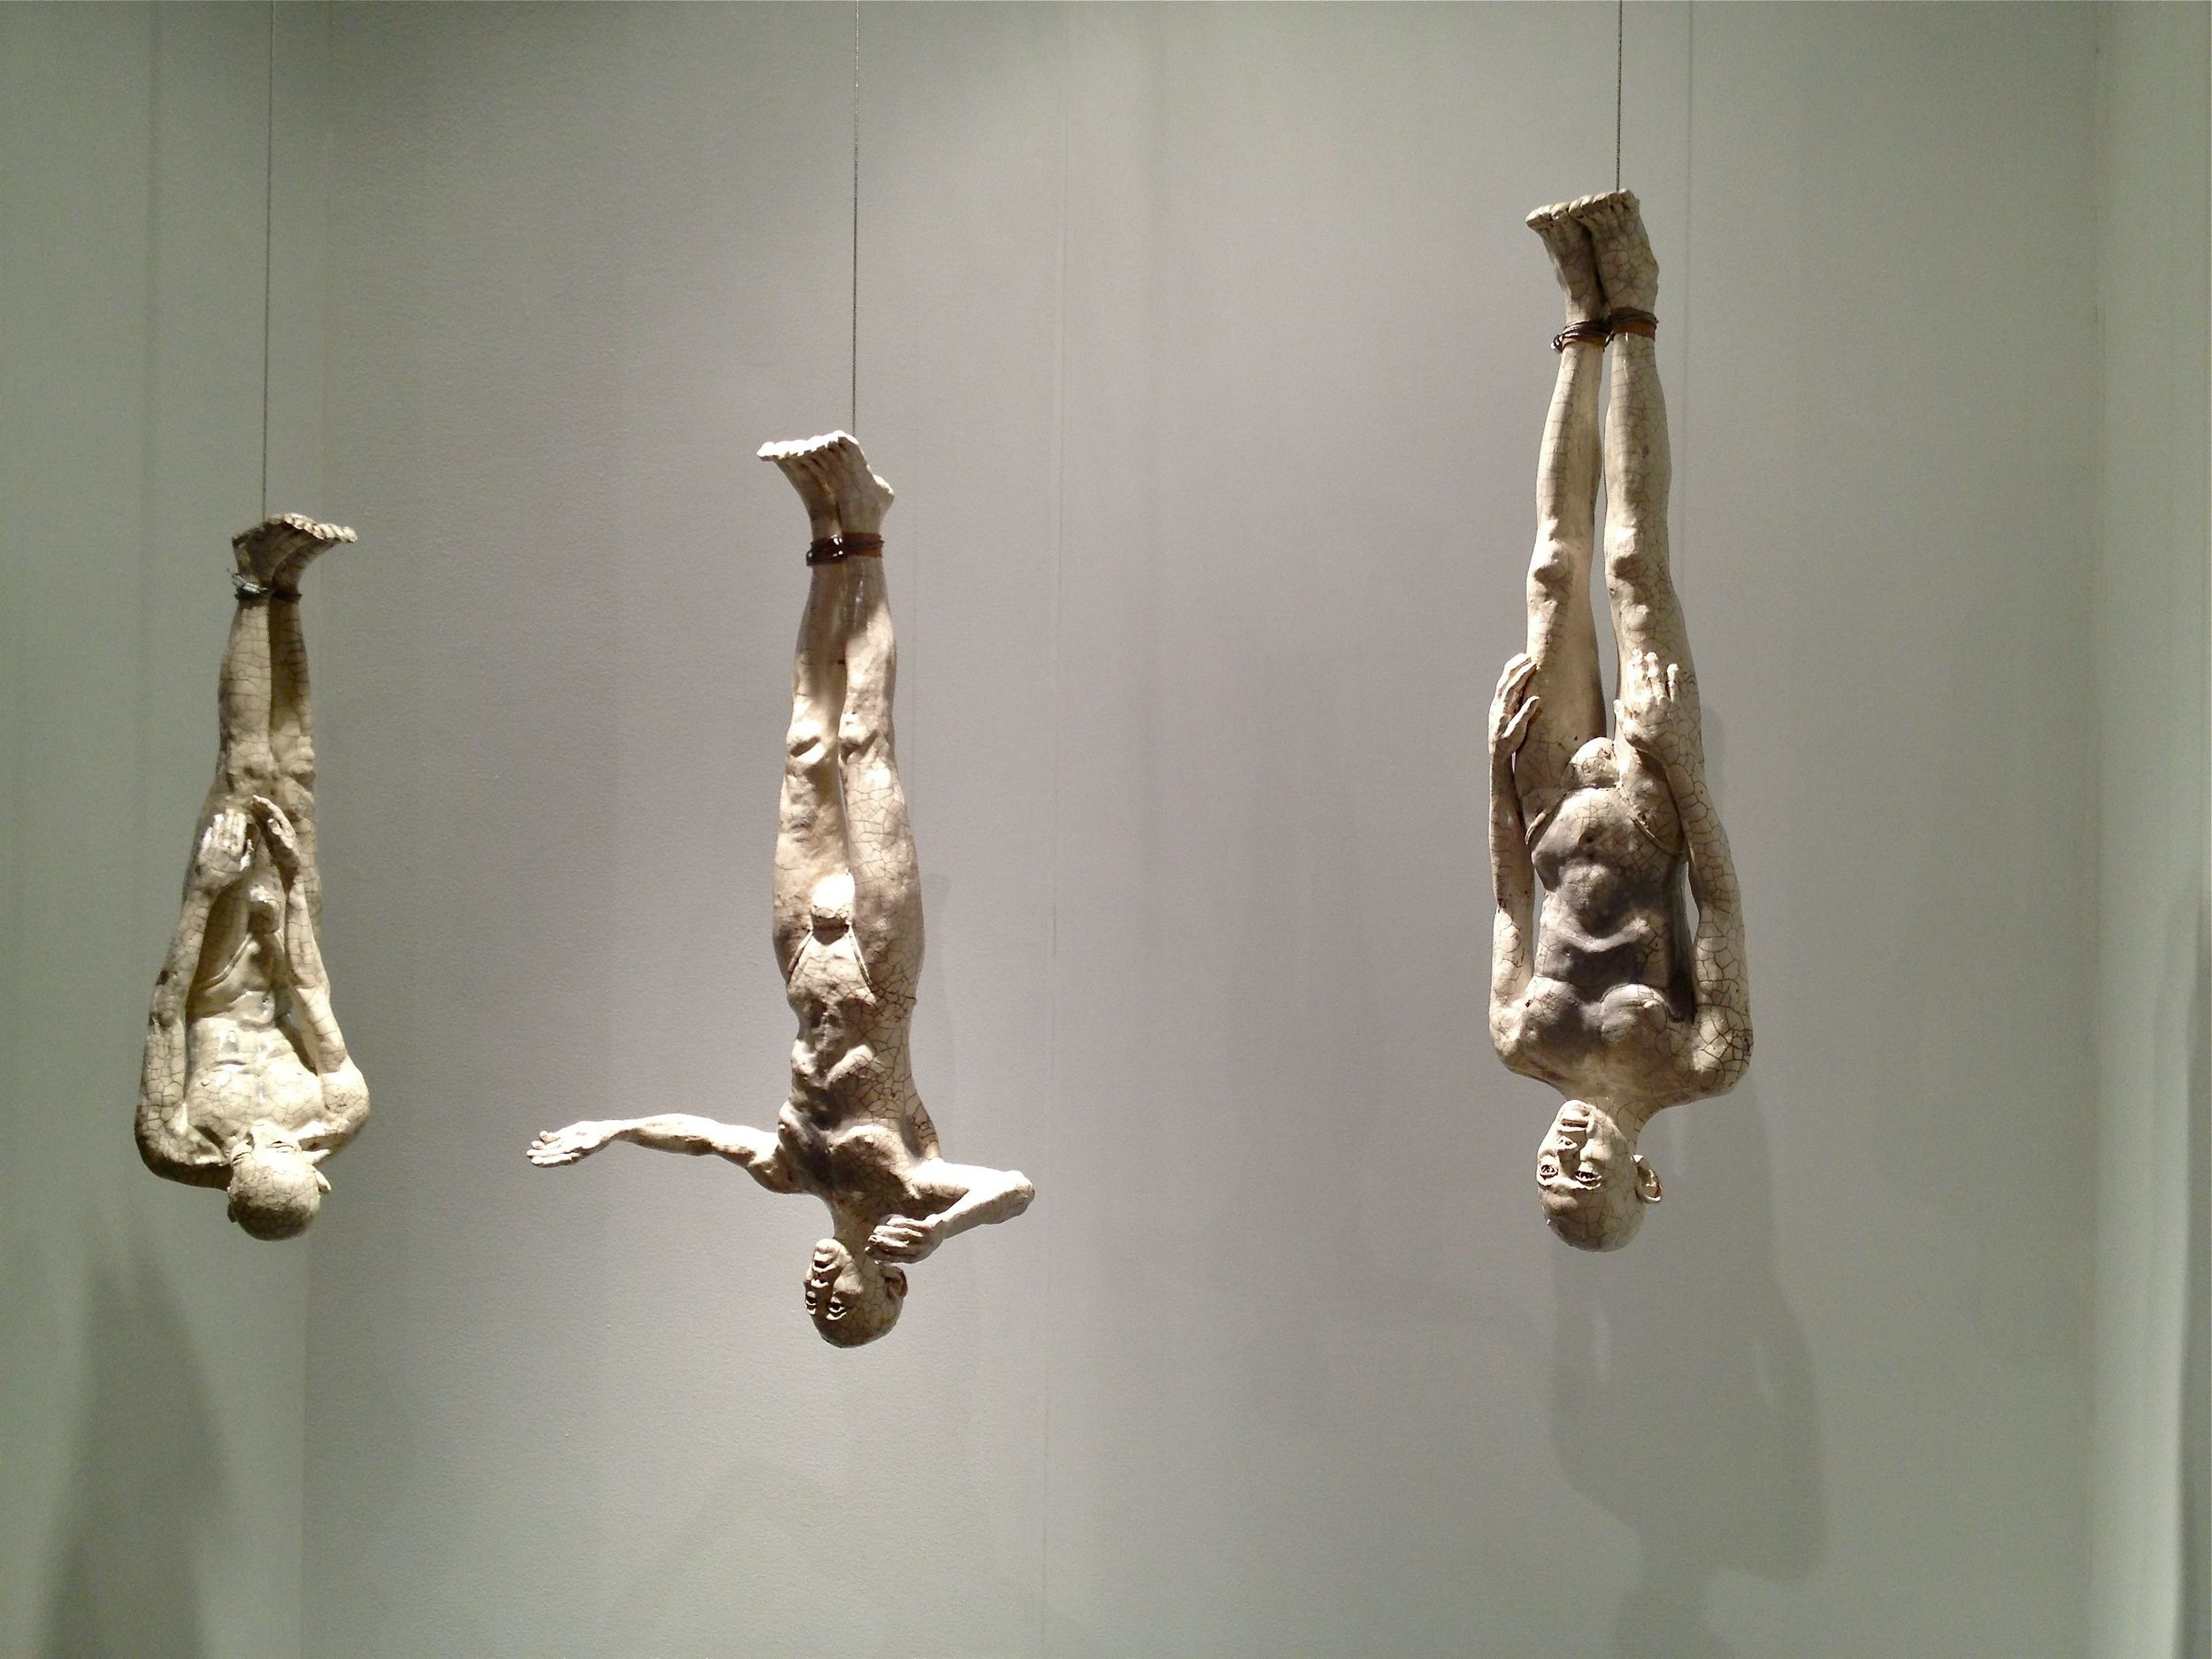   Three Hanging Butoh Figures (v3)  34"H figures, raku-fired stoneware, steel cable 